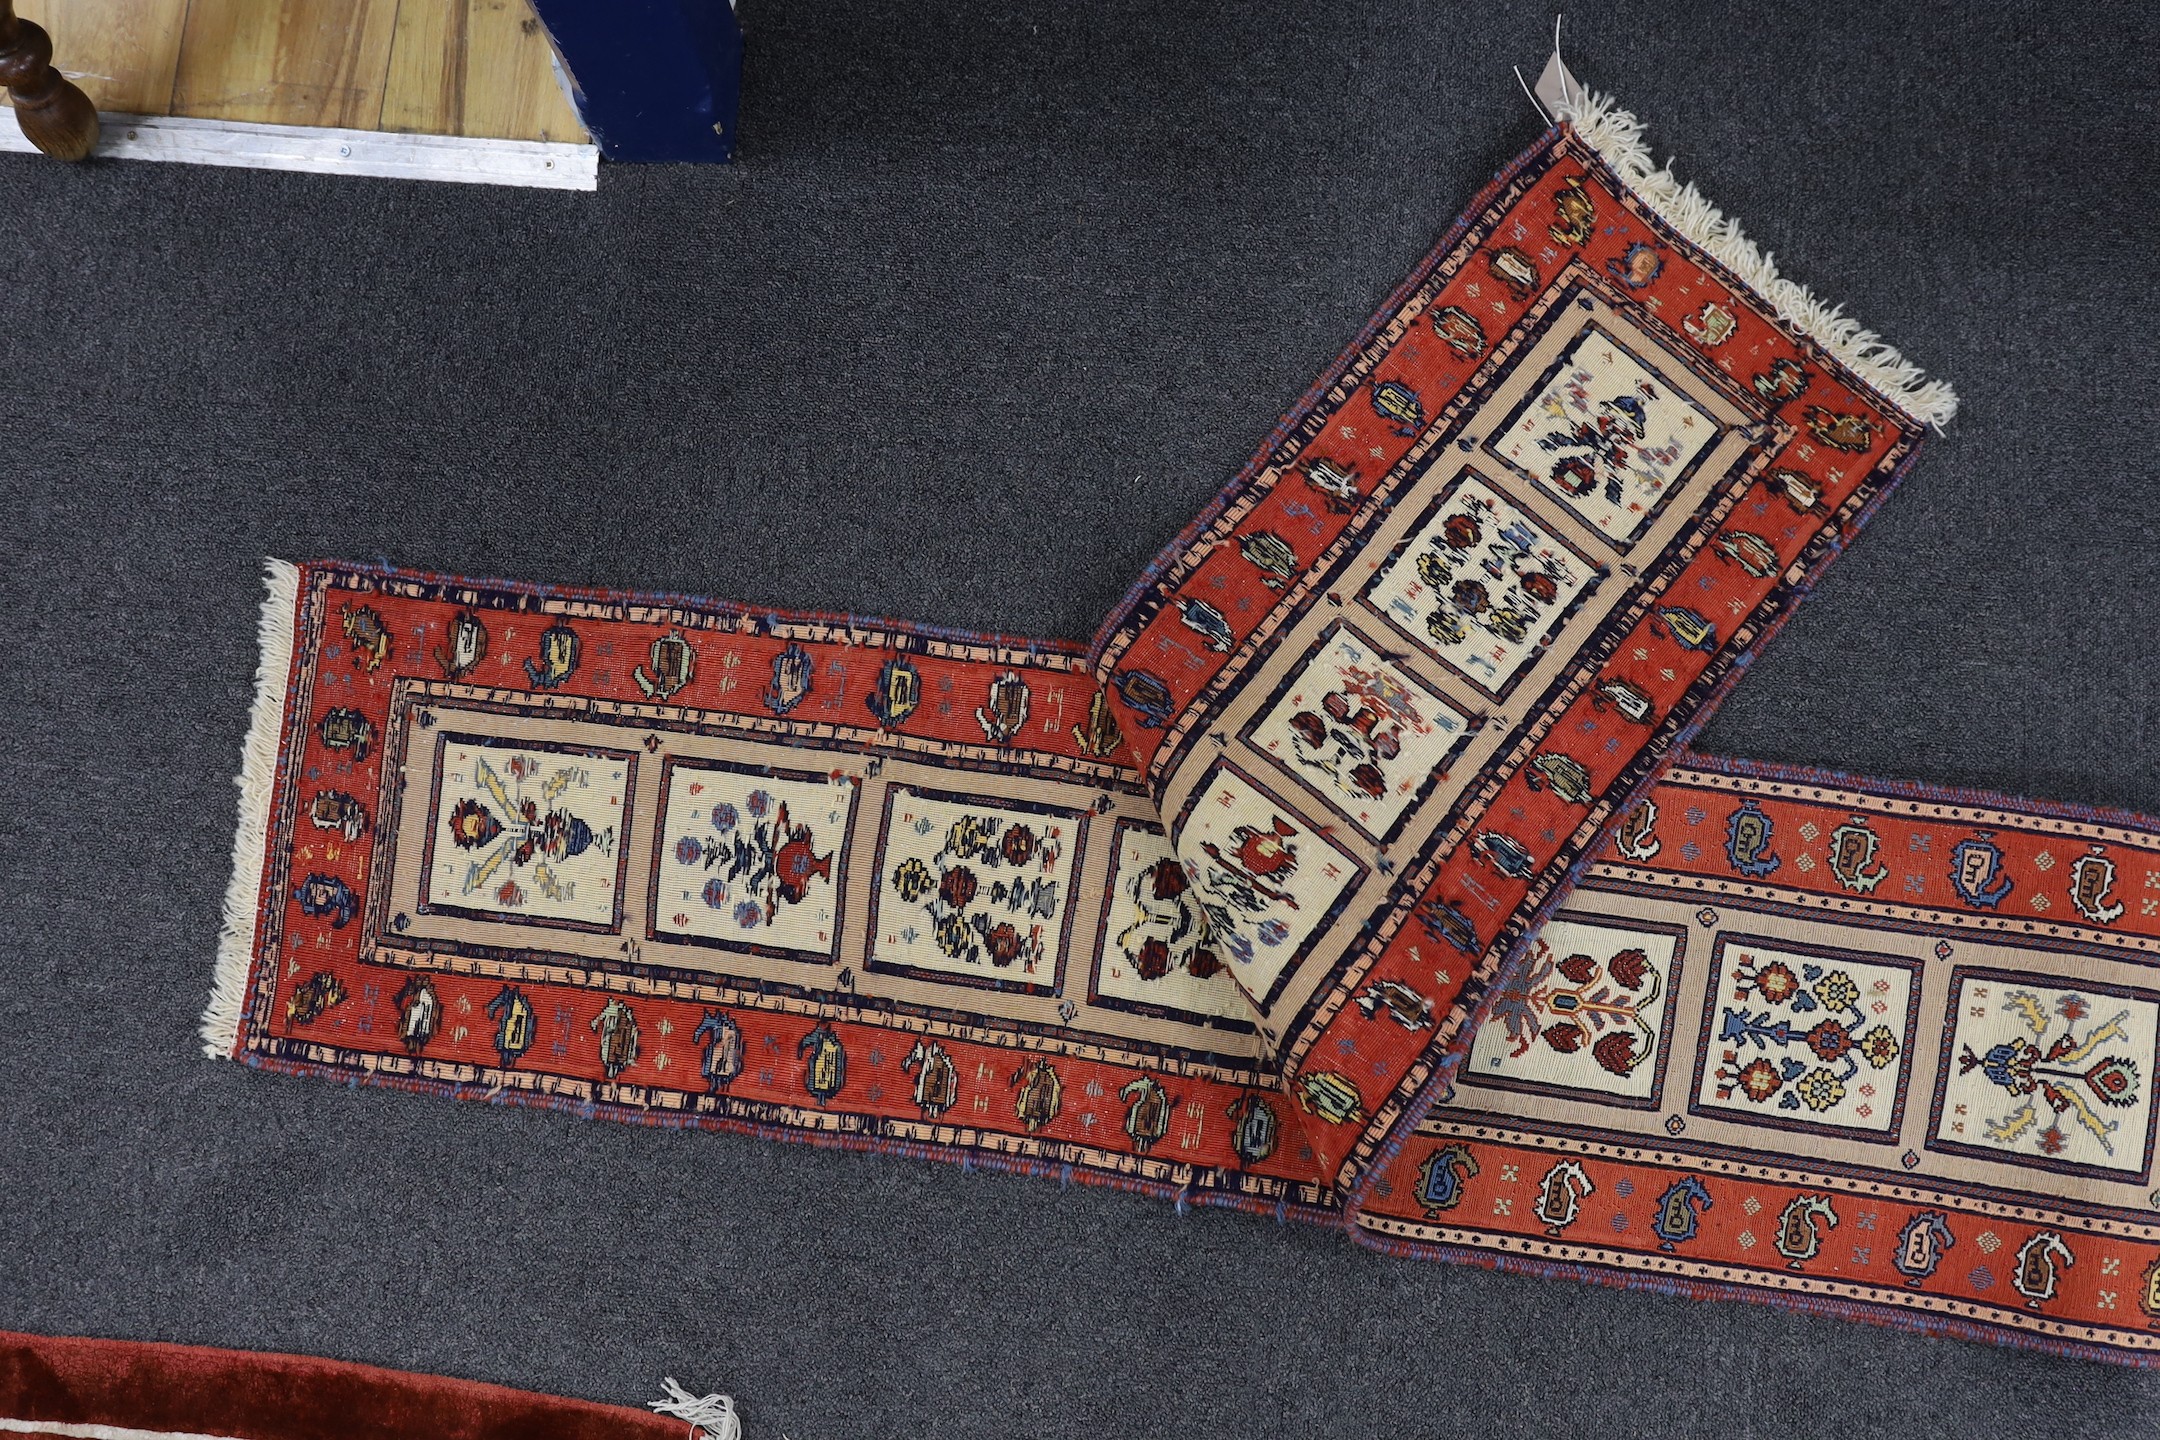 A Caucasian design red ground runner, approximately 250 x 35cm